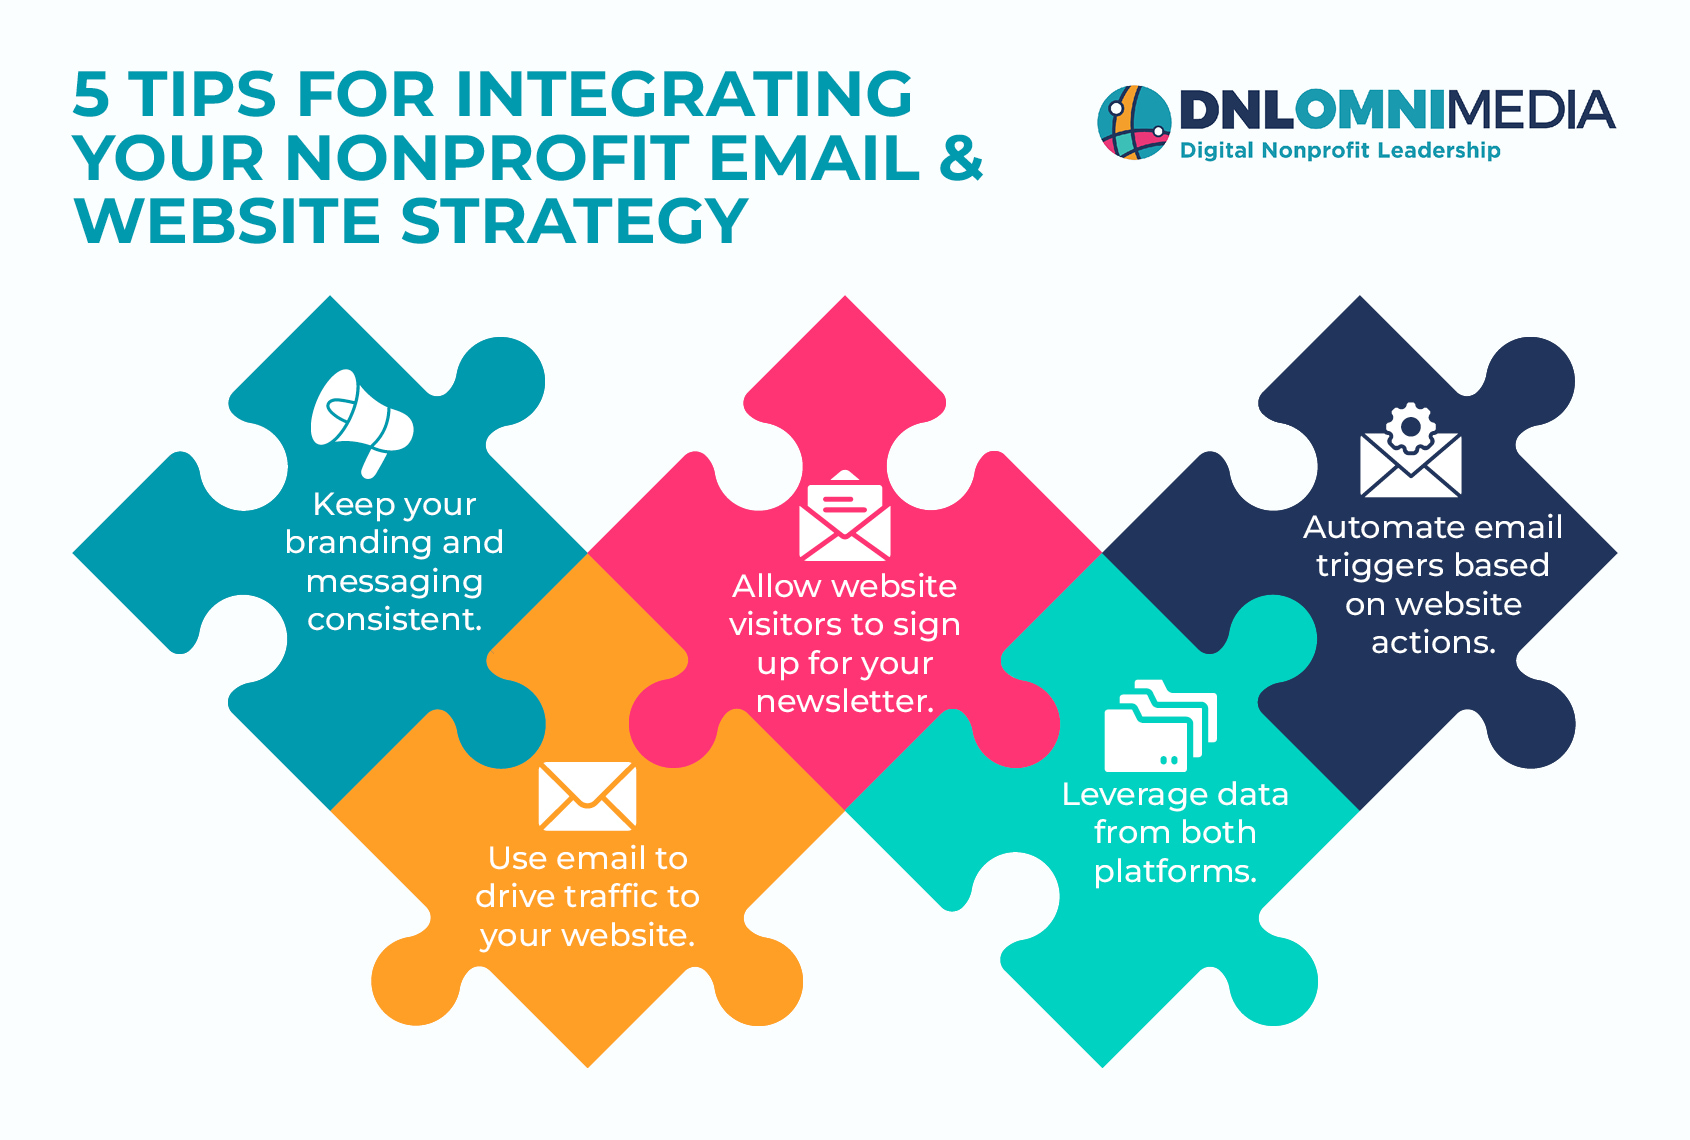 Five tips for integrating your nonprofit email and website strategy, as discussed throughout the text.